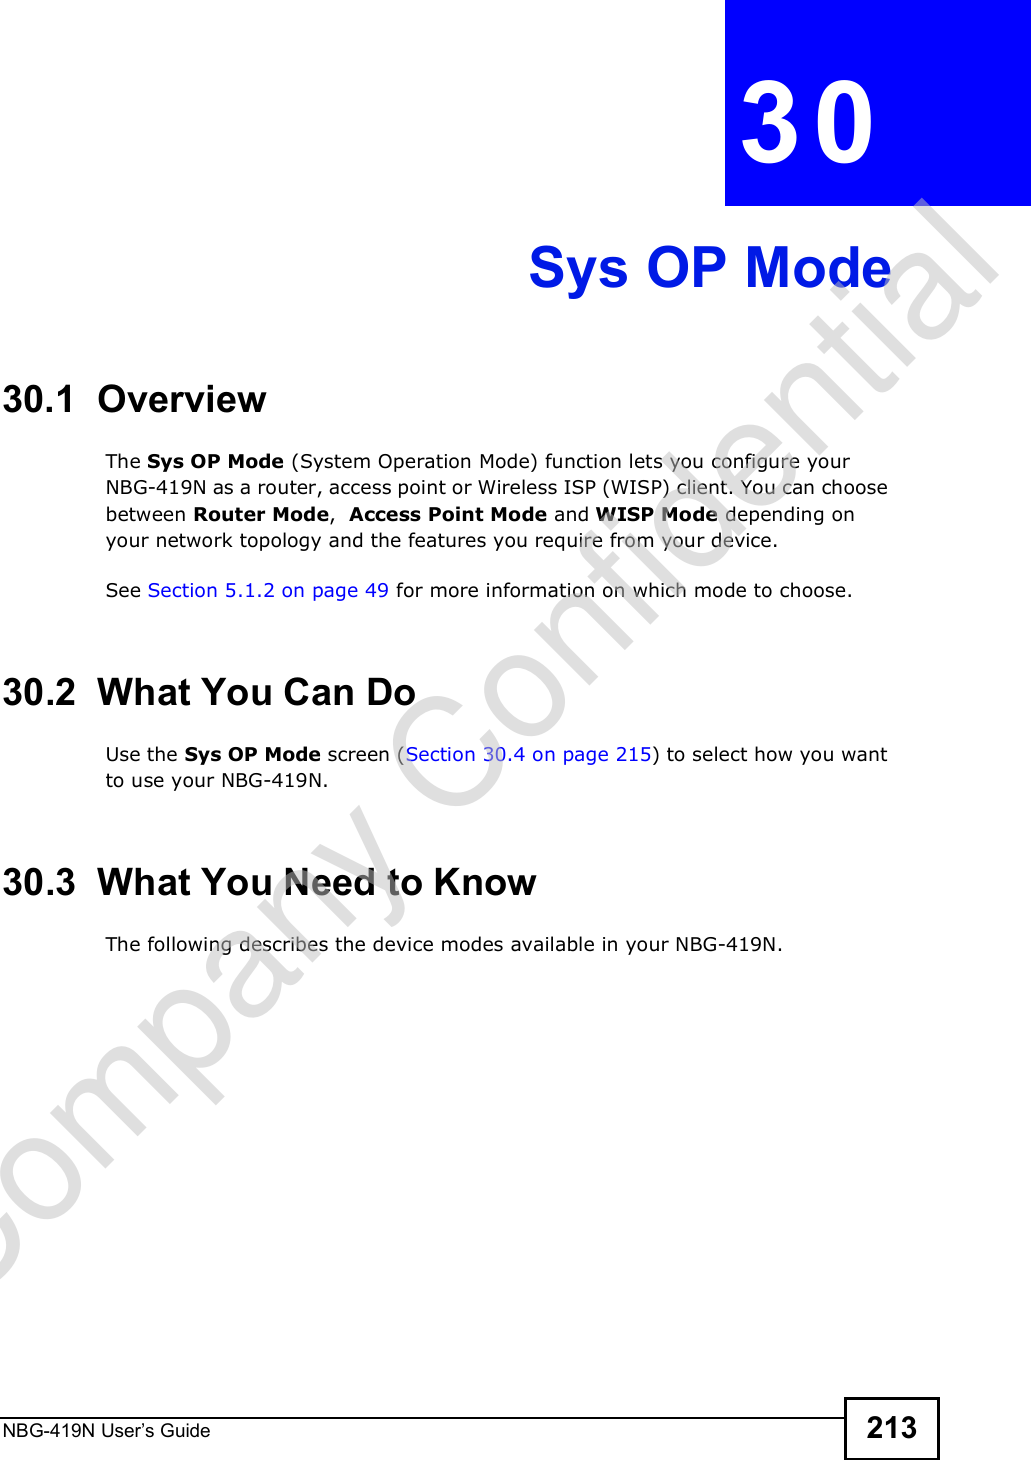 NBG-419N User s Guide 213CHAPTER  30 Sys OP Mode30.1  OverviewThe Sys OP Mode (System Operation Mode) function lets you configure your NBG-419N as a router, access point or Wireless ISP (WISP) client. You can choose between Router Mode,  Access Point Mode and WISP Mode depending on your network topology and the features you require from your device. See Section 5.1.2 on page 49 for more information on which mode to choose.30.2  What You Can DoUse the Sys OP Mode screen (Section 30.4 on page 215) to select how you want to use your NBG-419N. 30.3  What You Need to KnowThe following describes the device modes available in your NBG-419N.Company Confidential